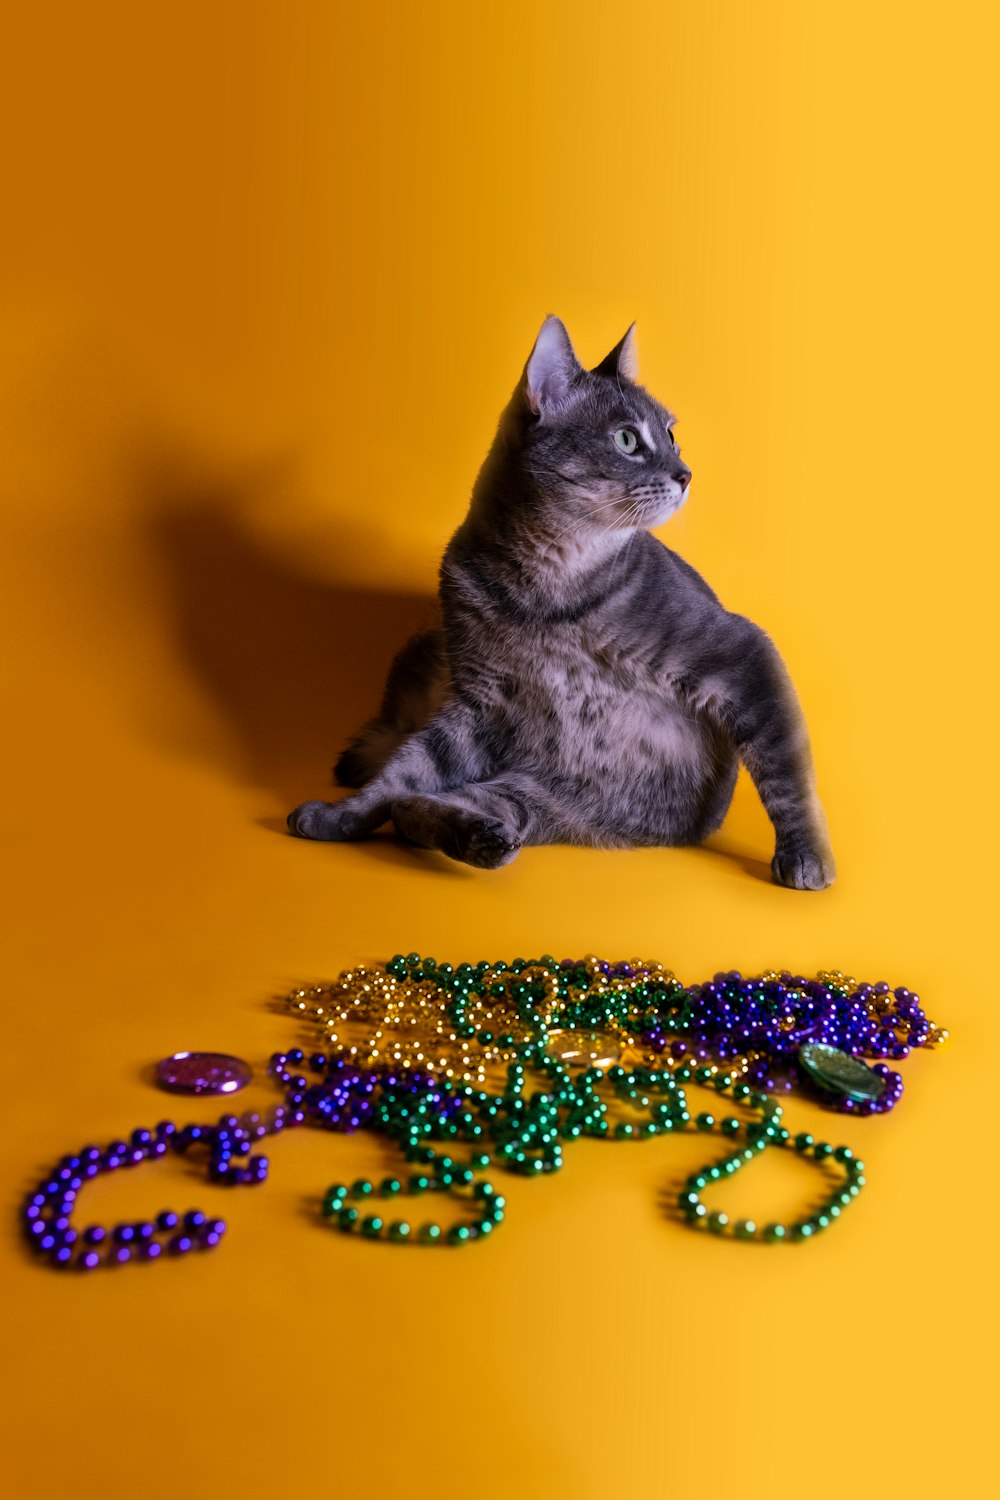 a cat sitting on the floor next to beads